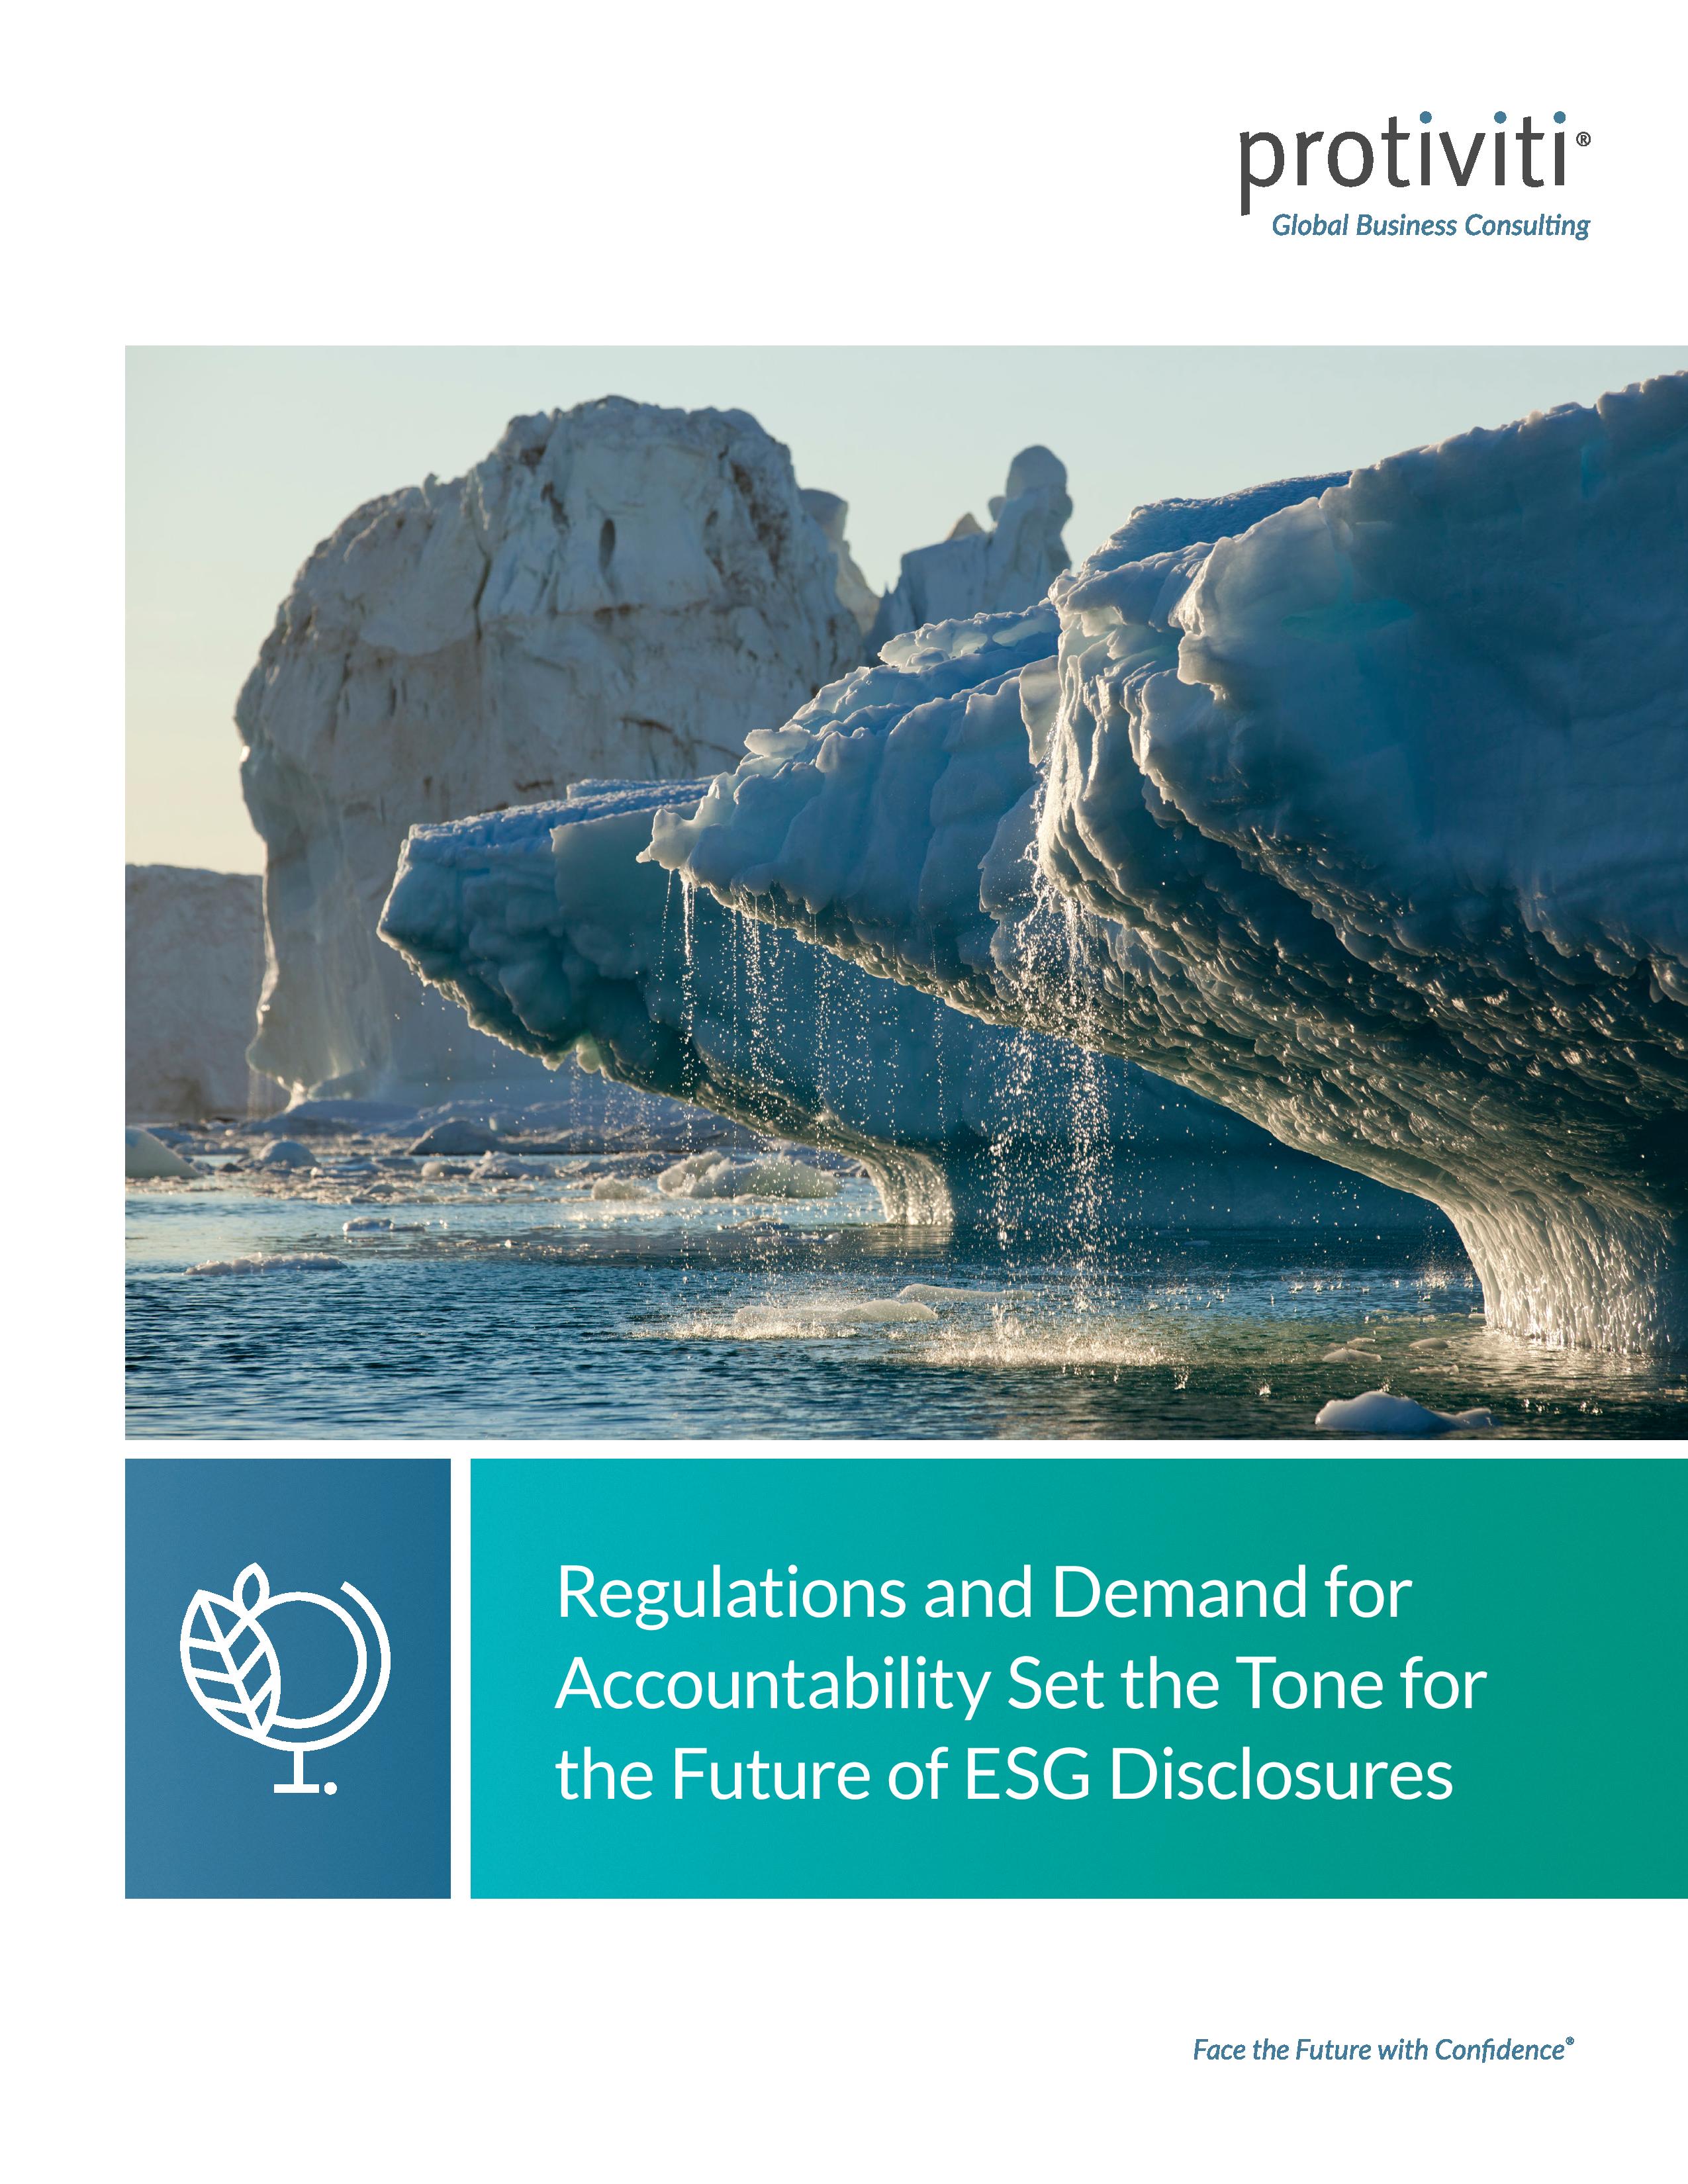 Screenshot of the first page of Regulations and Demand for Accountability Set the Tone for the Future of ESG Disclosures